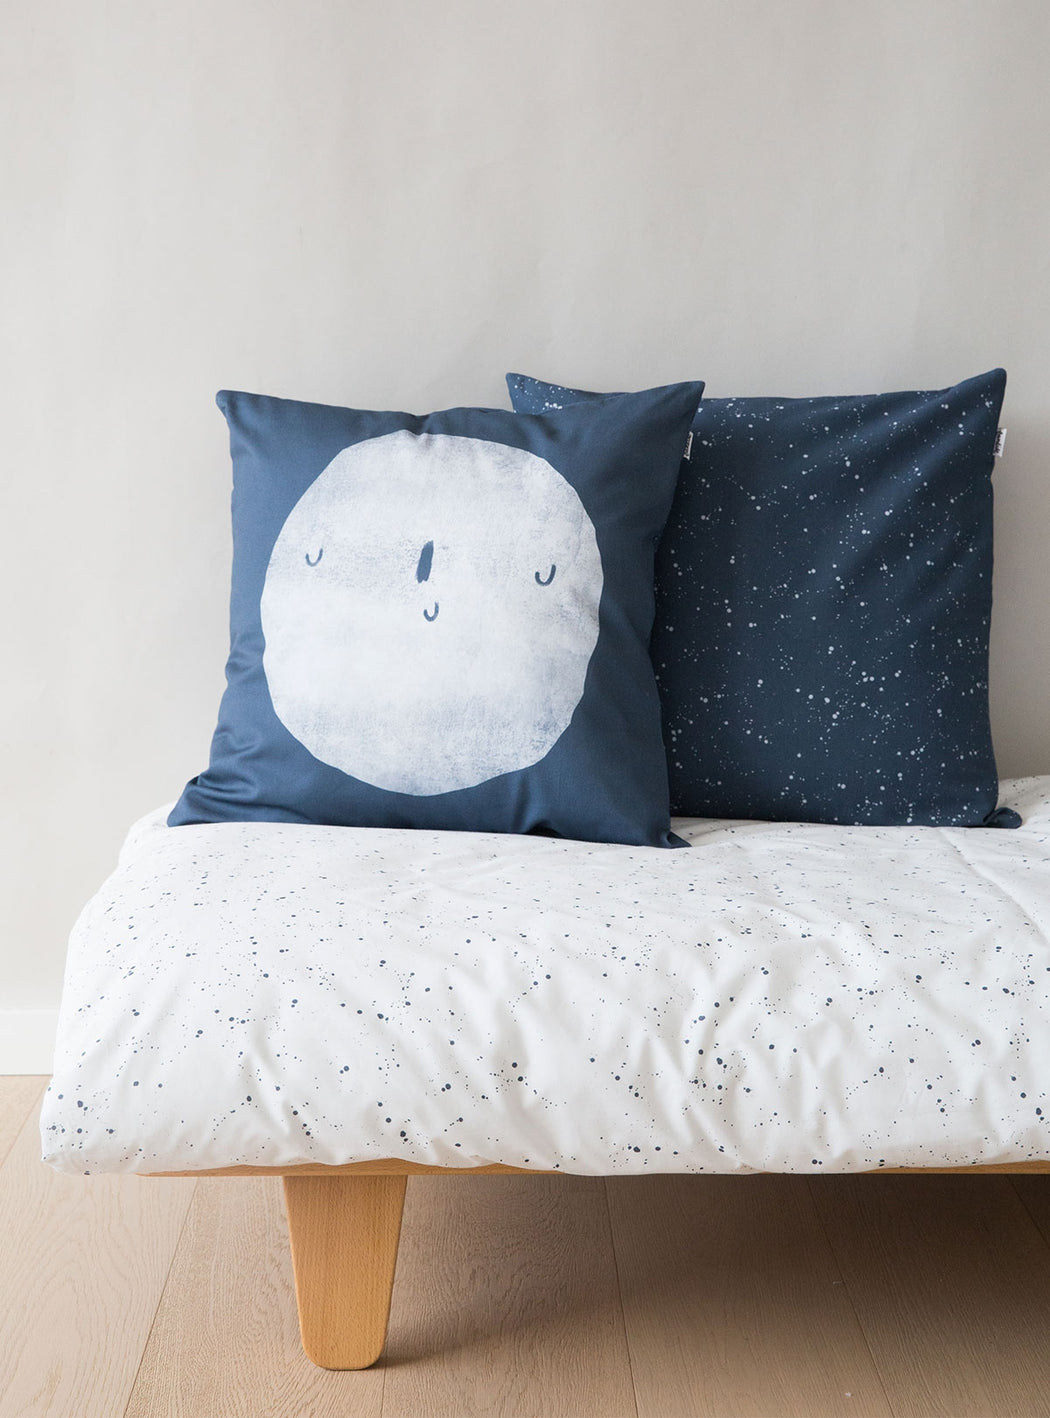 Set of Blue Cosmos Duvet cover for bed of 90 cm + Sleeping Moon Pillowcase 50 x 50 cm